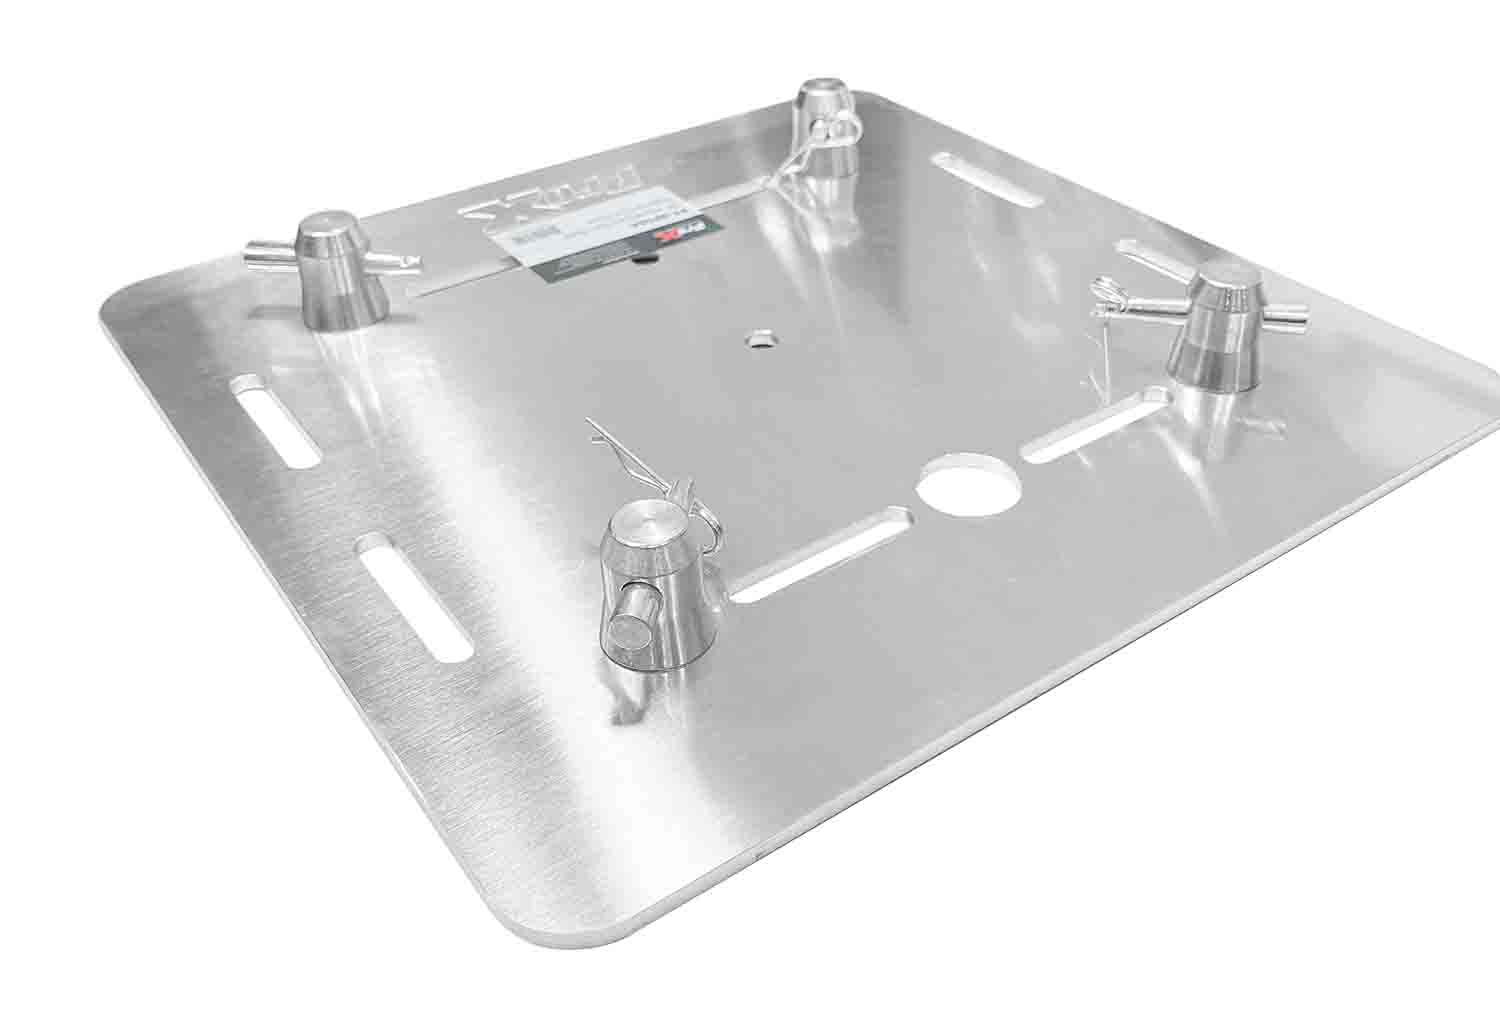 ProX XT-BP16A Single 16-Inch Aluminum 6mm Truss Base Plate for F34 F32 F31 Conical Square Truss with Connectors - Hollywood DJ